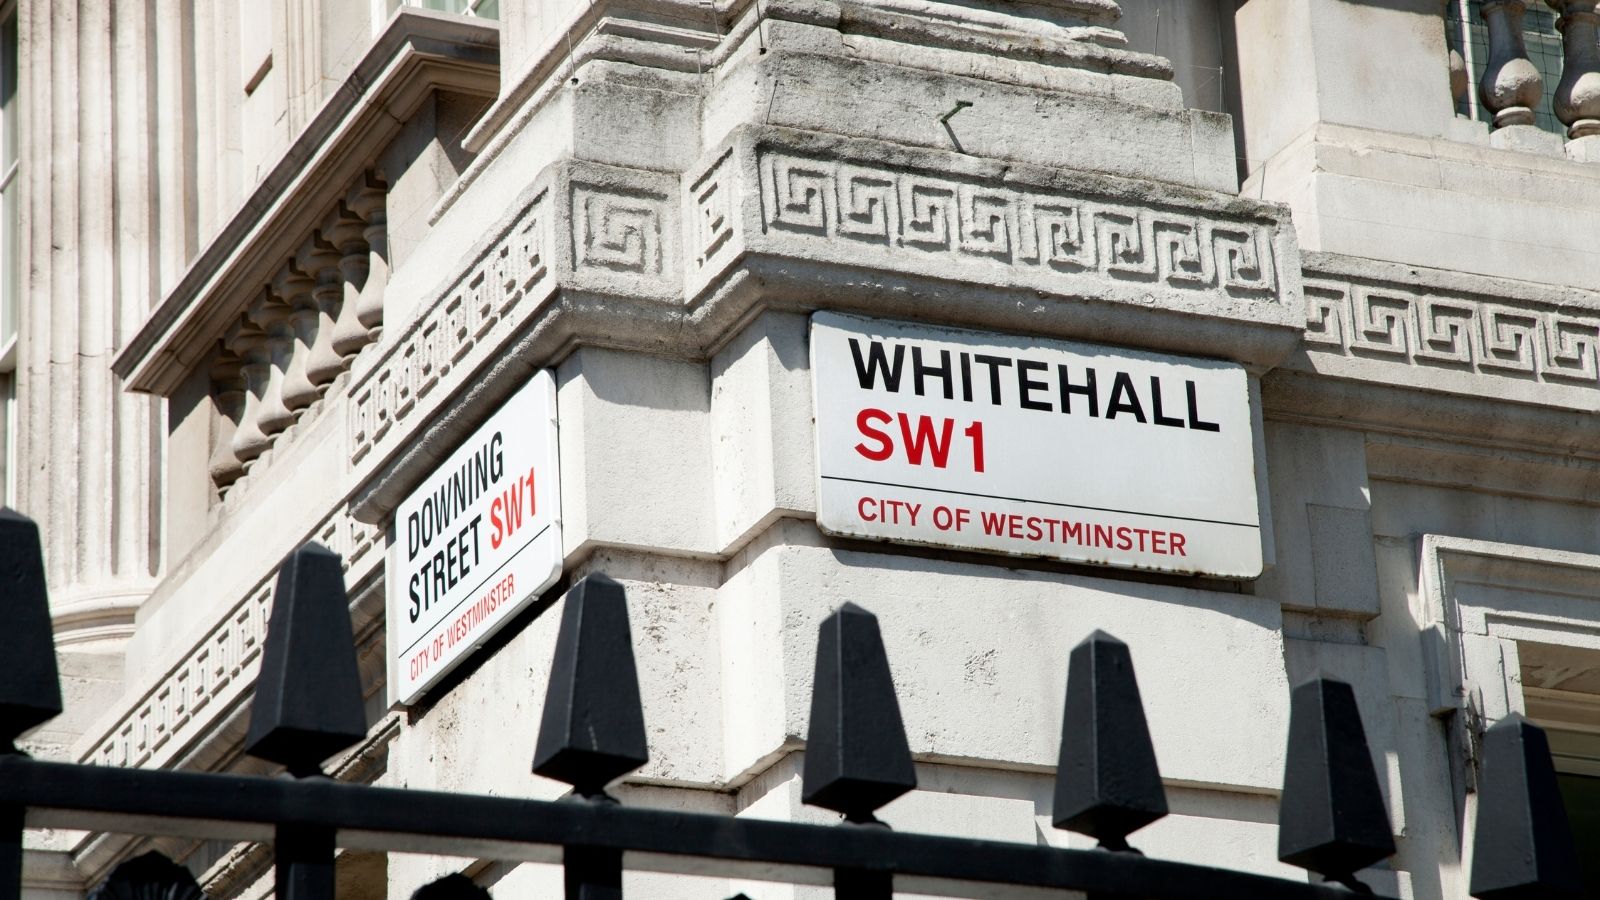 Photo showing Road Signs for Whitehall and Downing Street